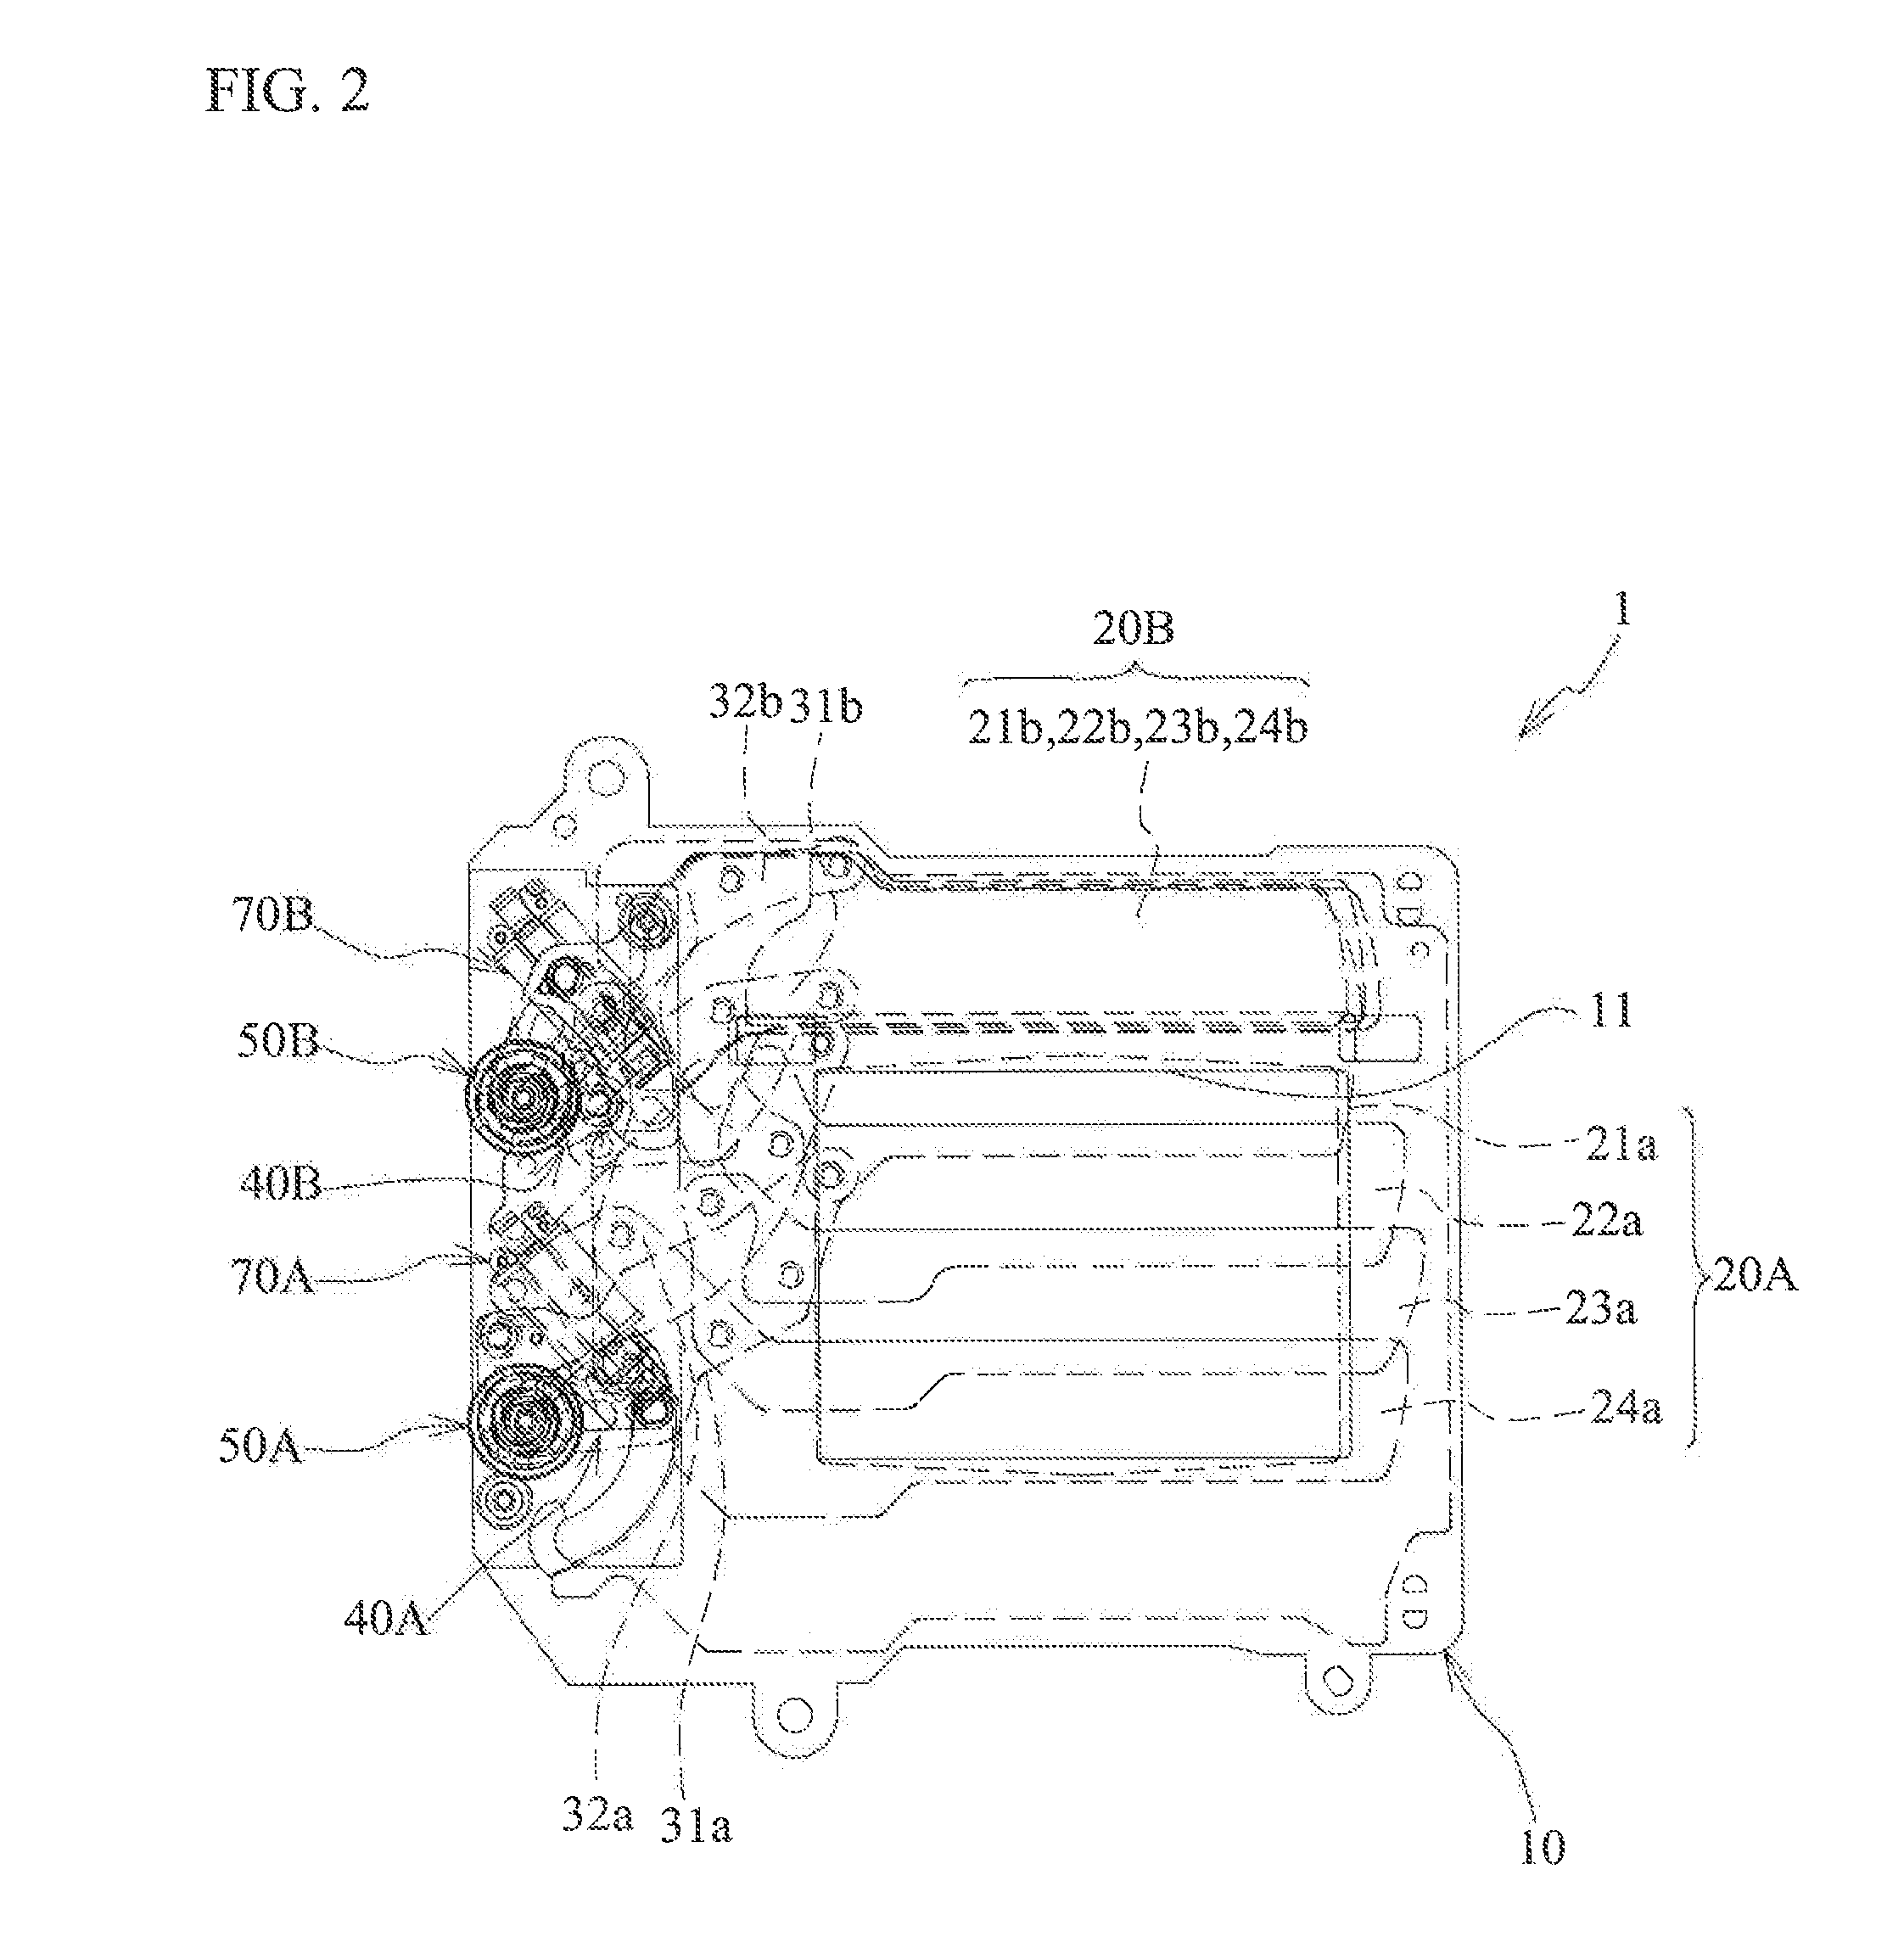 Focal plane shutter and optical apparatus